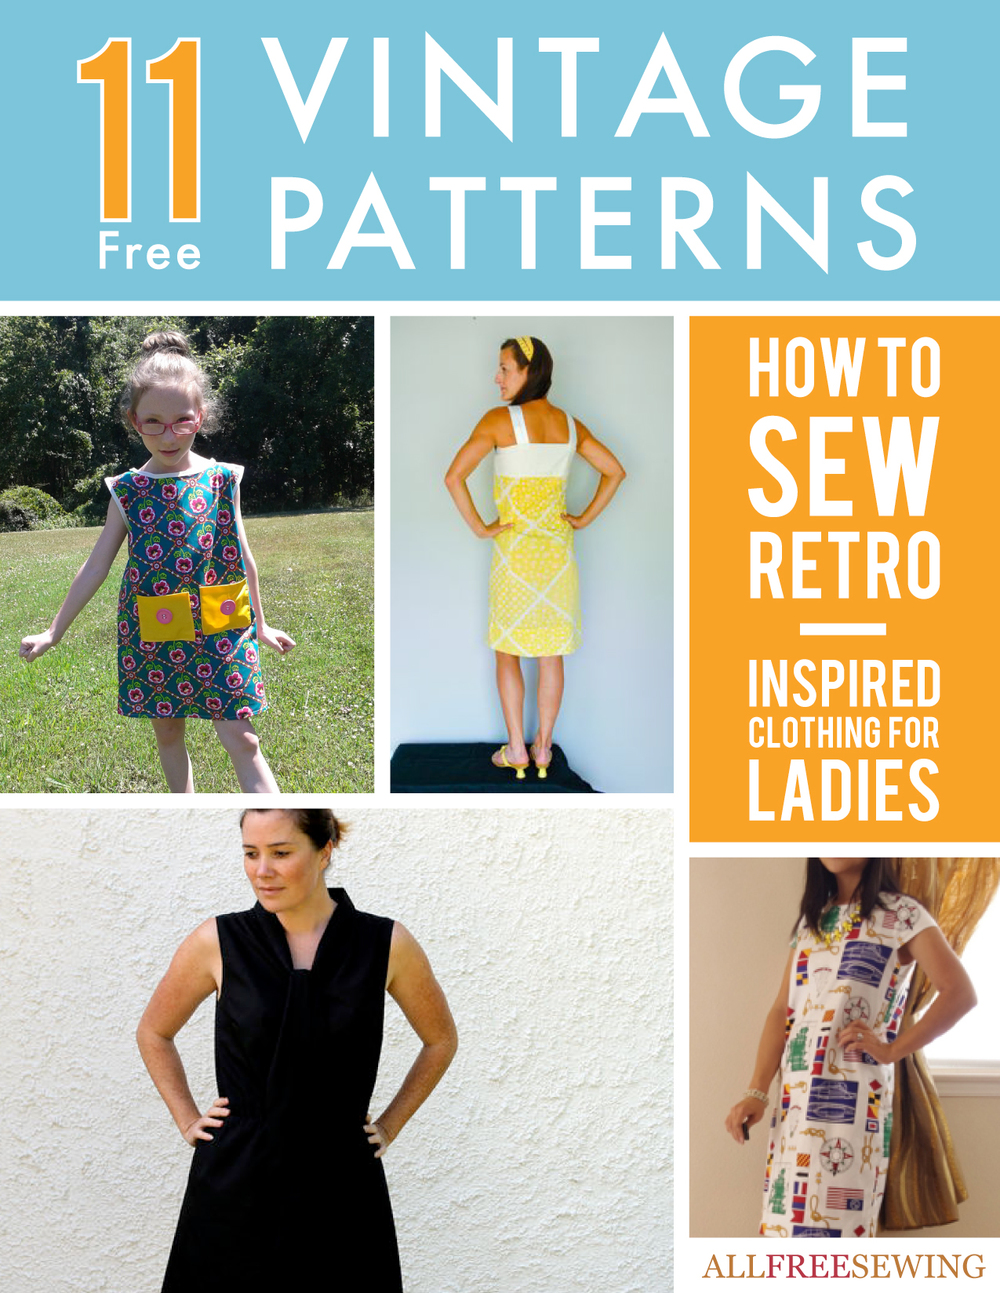 11 Free Vintage Patterns How to Sew Retro Inspired Clothing for Ladies Free eBook cover ExtraLarge1000 ID 999225